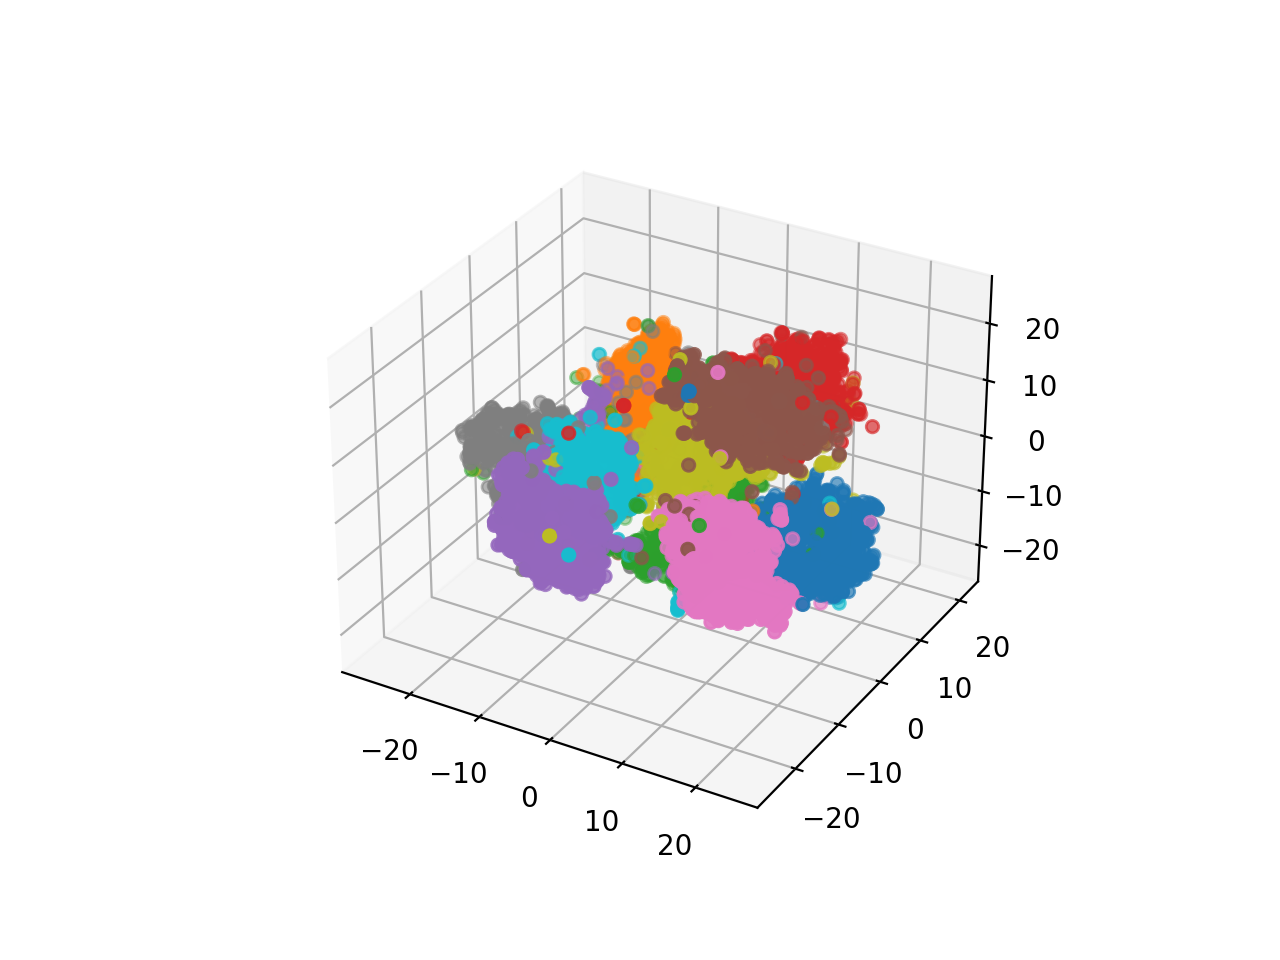 vae_mnist_deep_model_latent_dim128_latent_space_with_tsne_3d_epoch25